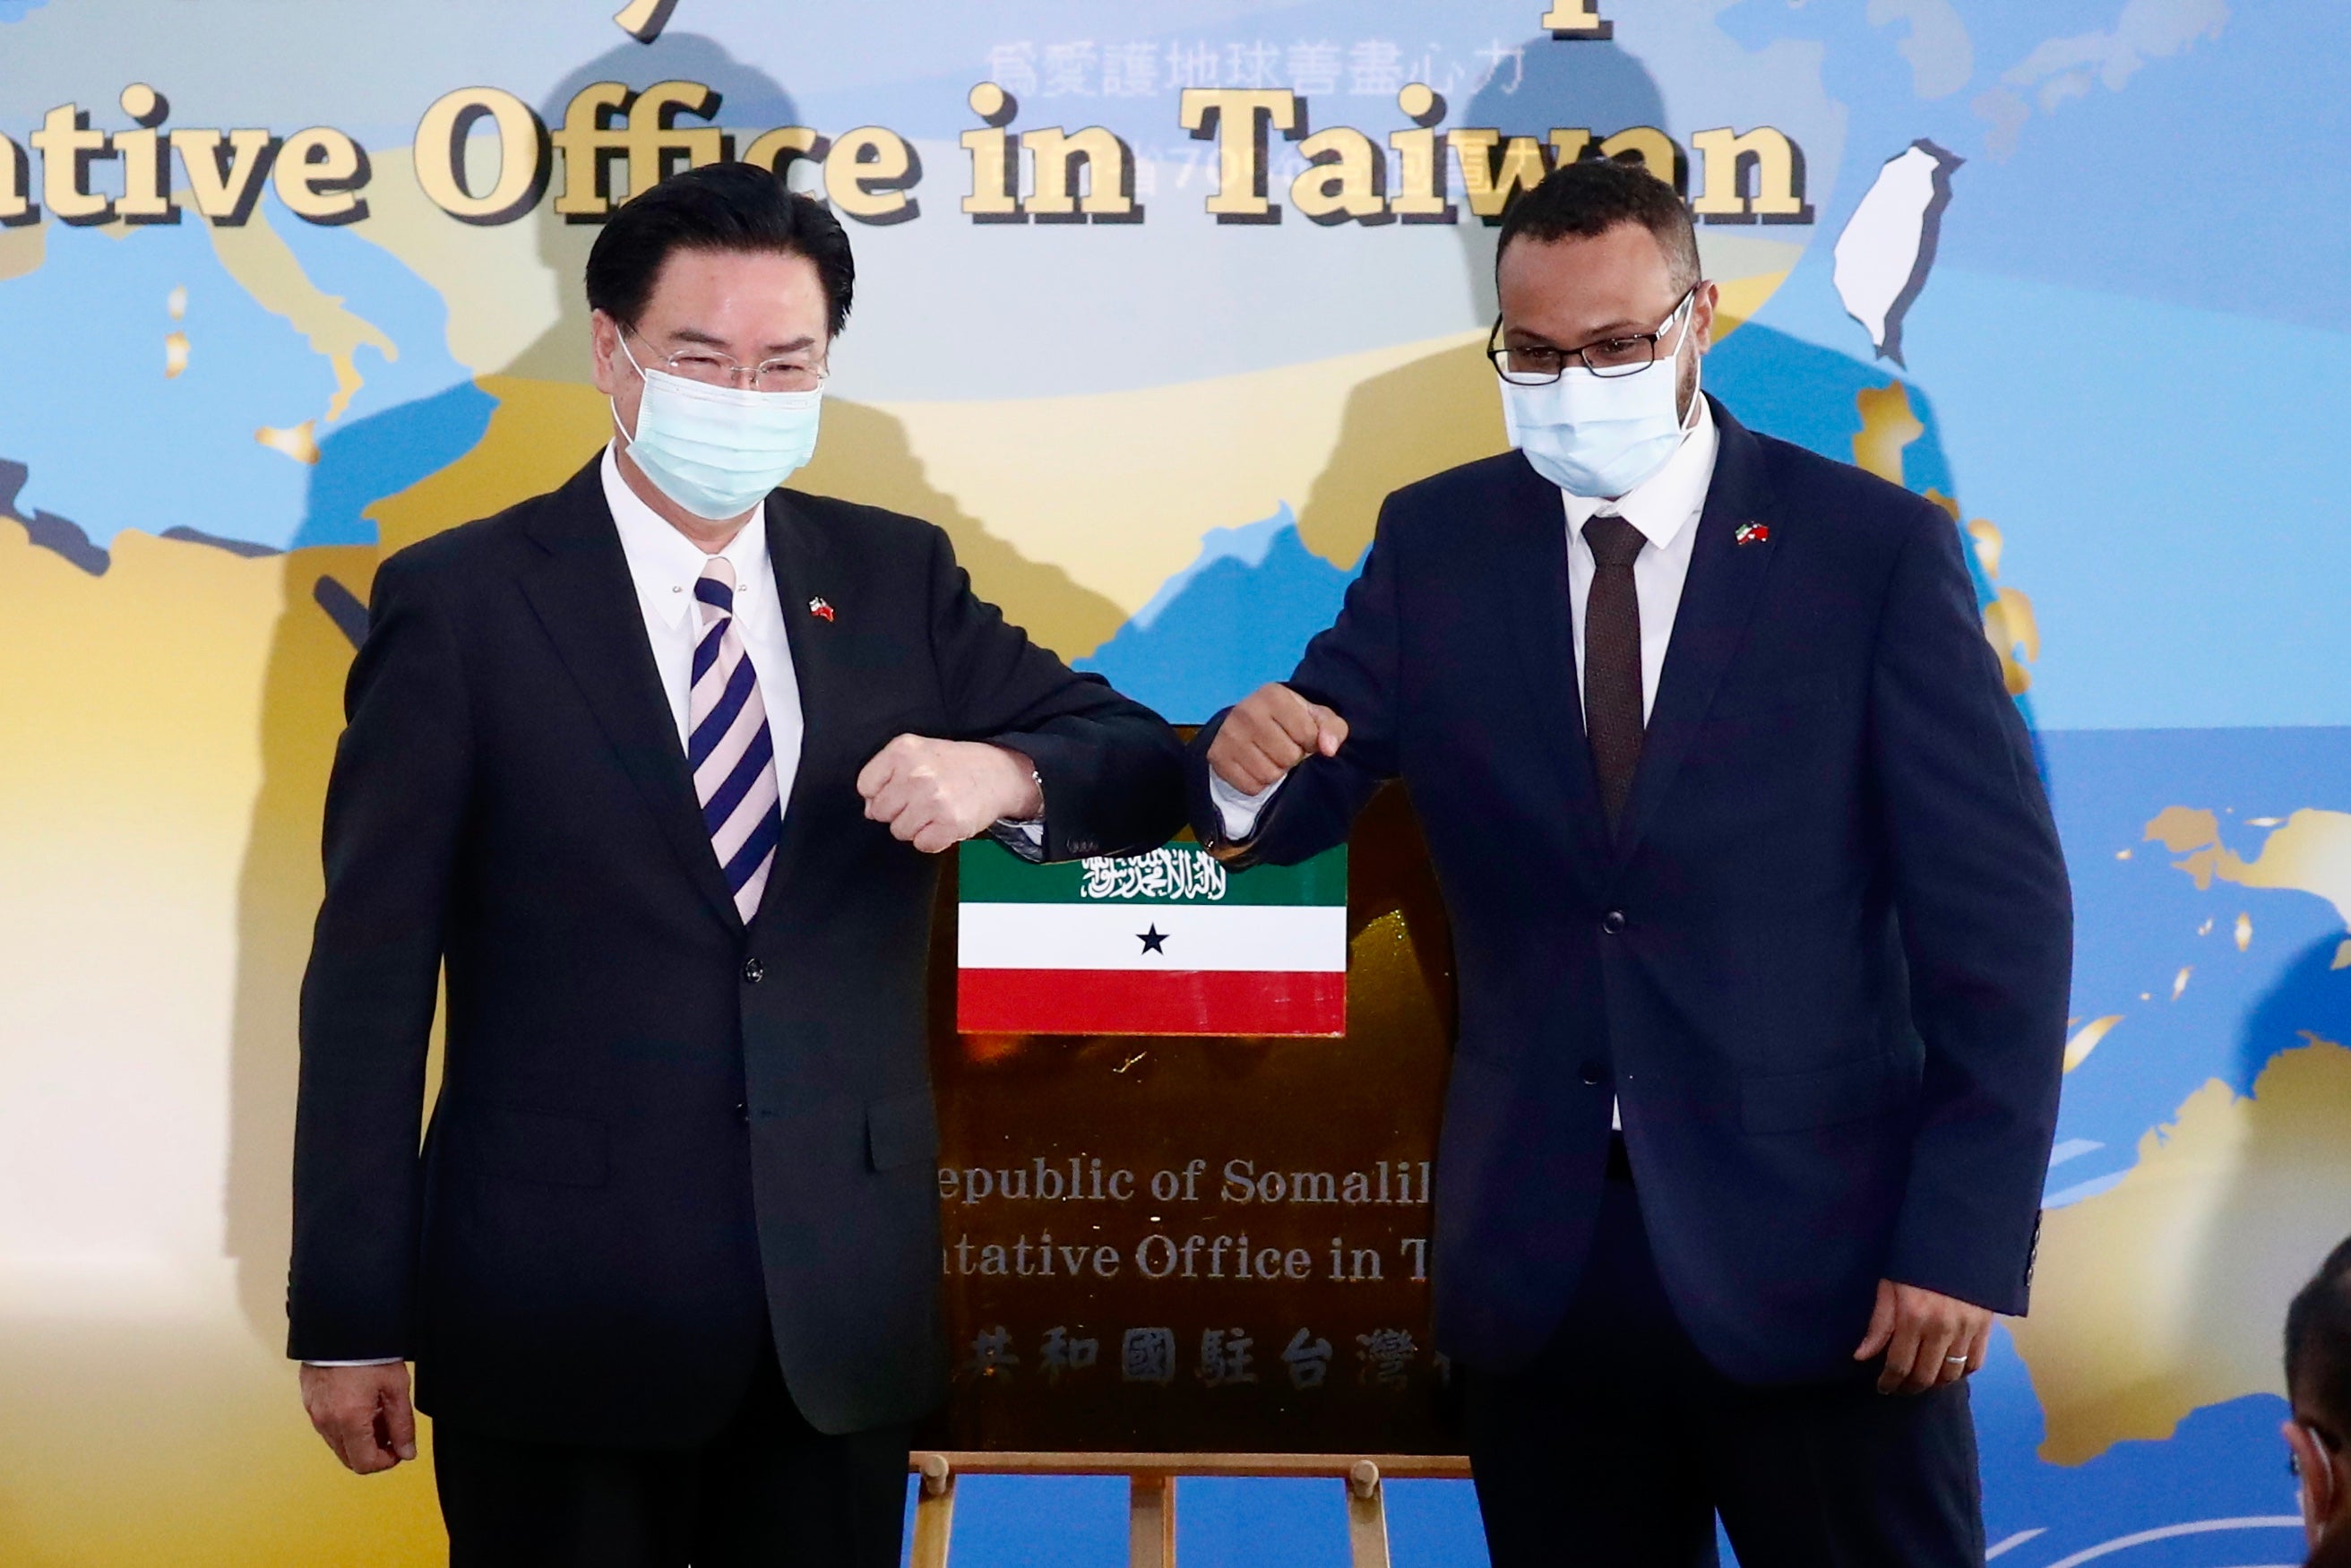 File photo: Foreign Minister of Taiwan Joseph Wu (L) and Republic of Somaliland Ambassador Mohamed Hagi (R) bump elbows during the opening ceremony of The Republic of Somaliland Representative Office in Taipei, Taiwan, 9 September 2020